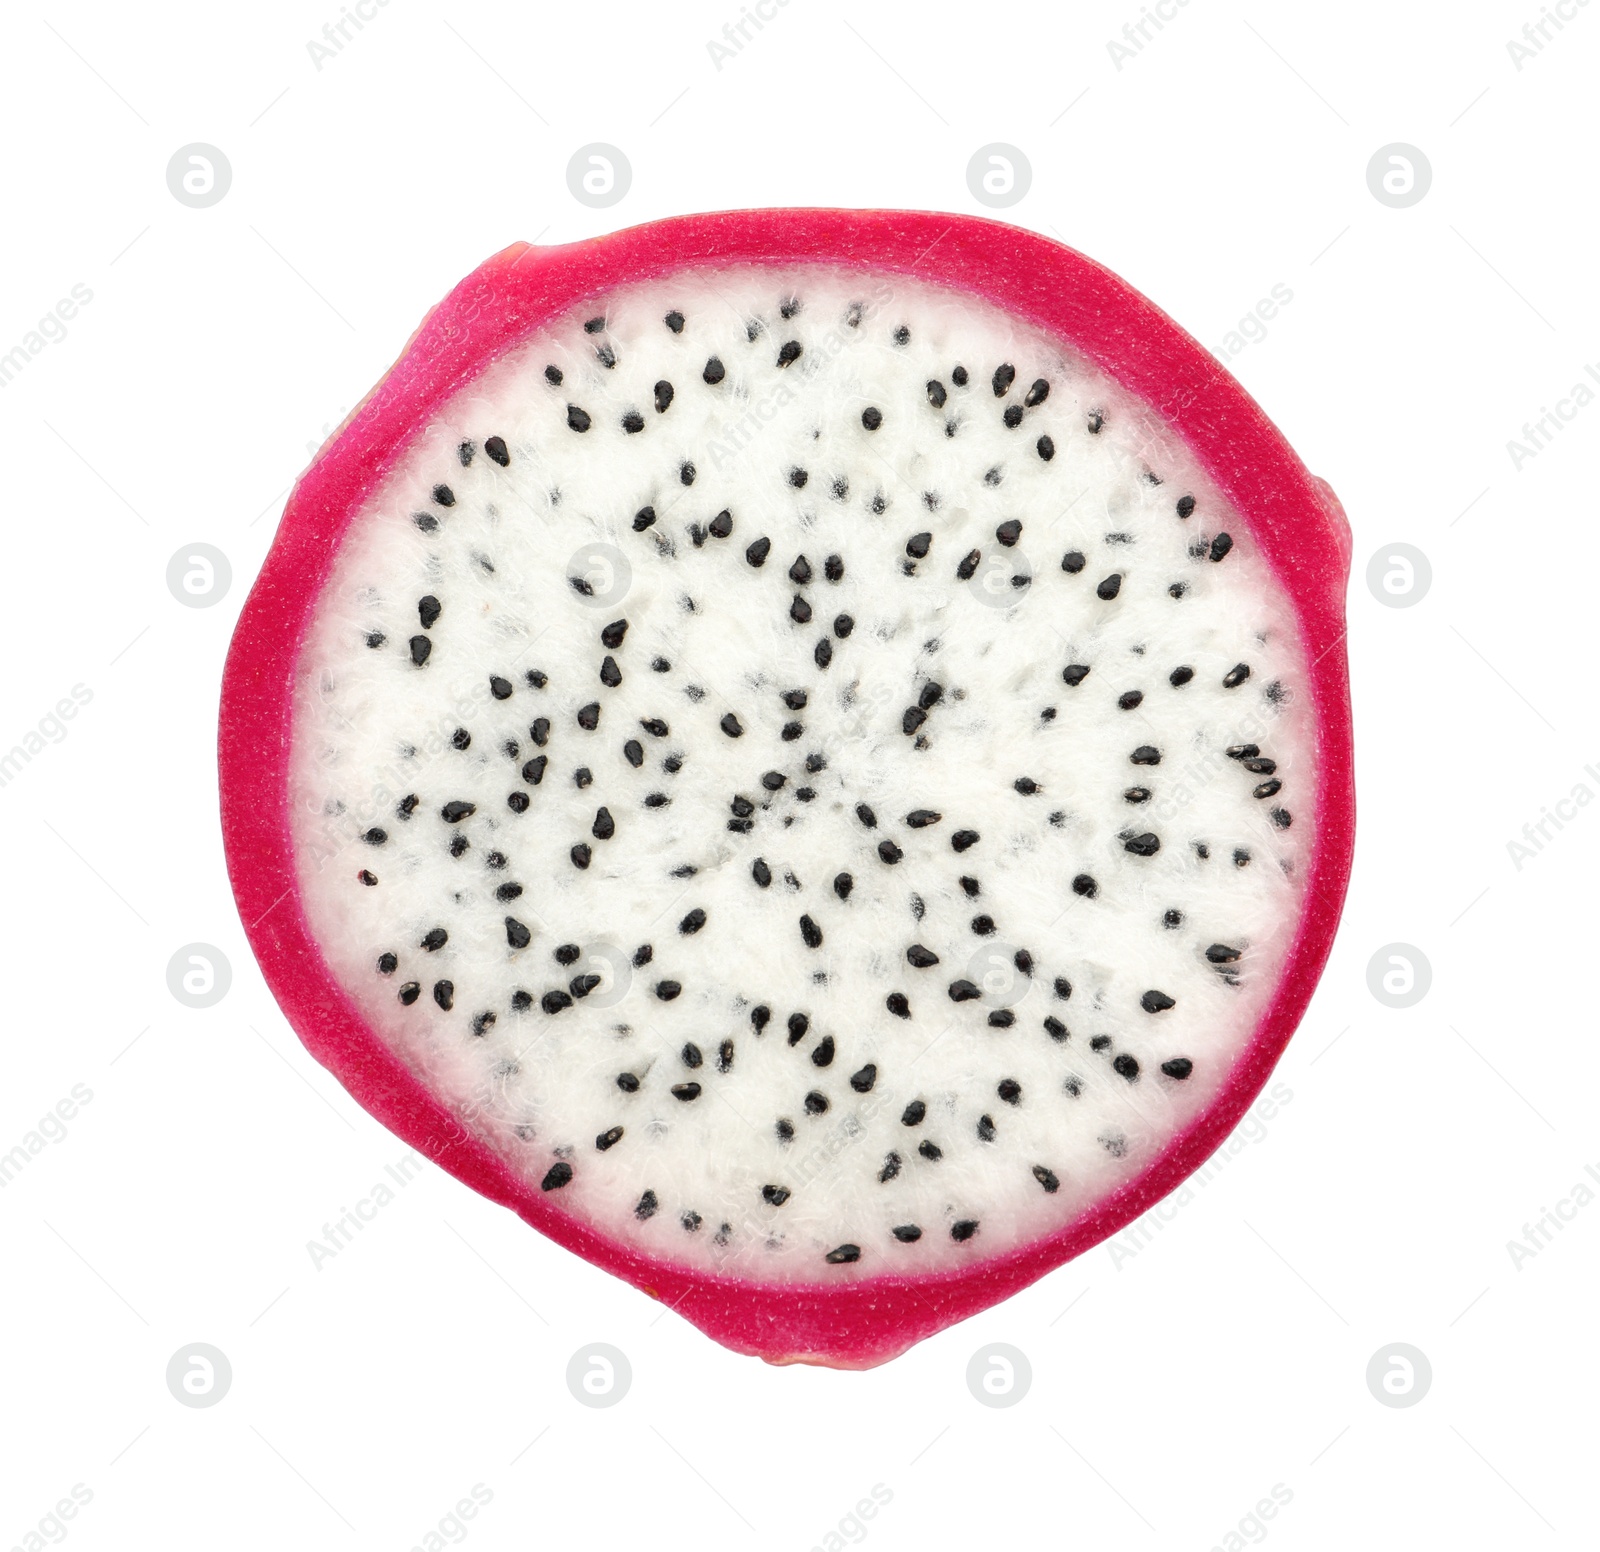 Photo of Slice of delicious ripe dragon fruit (pitahaya) on white background, top view